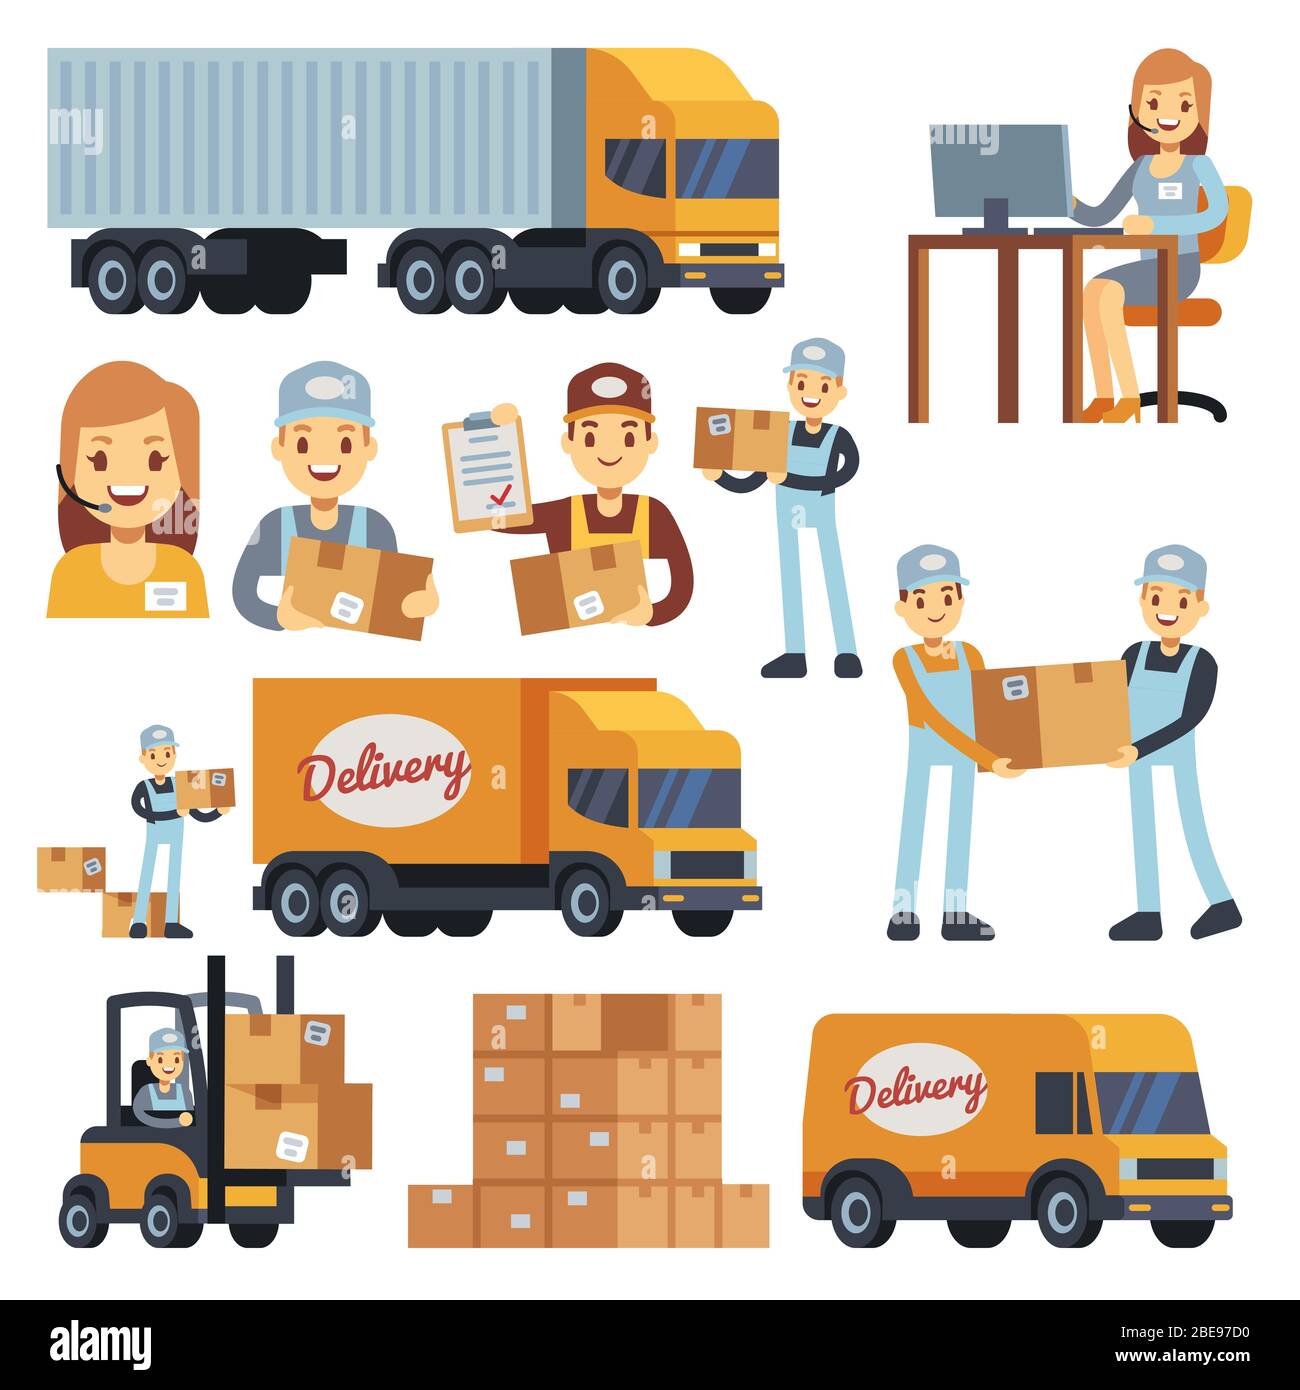 Warehouse workers cartoon vector characters - loader, delivery man, courier and operator. Warehouse delivery business illustration Stock Vector